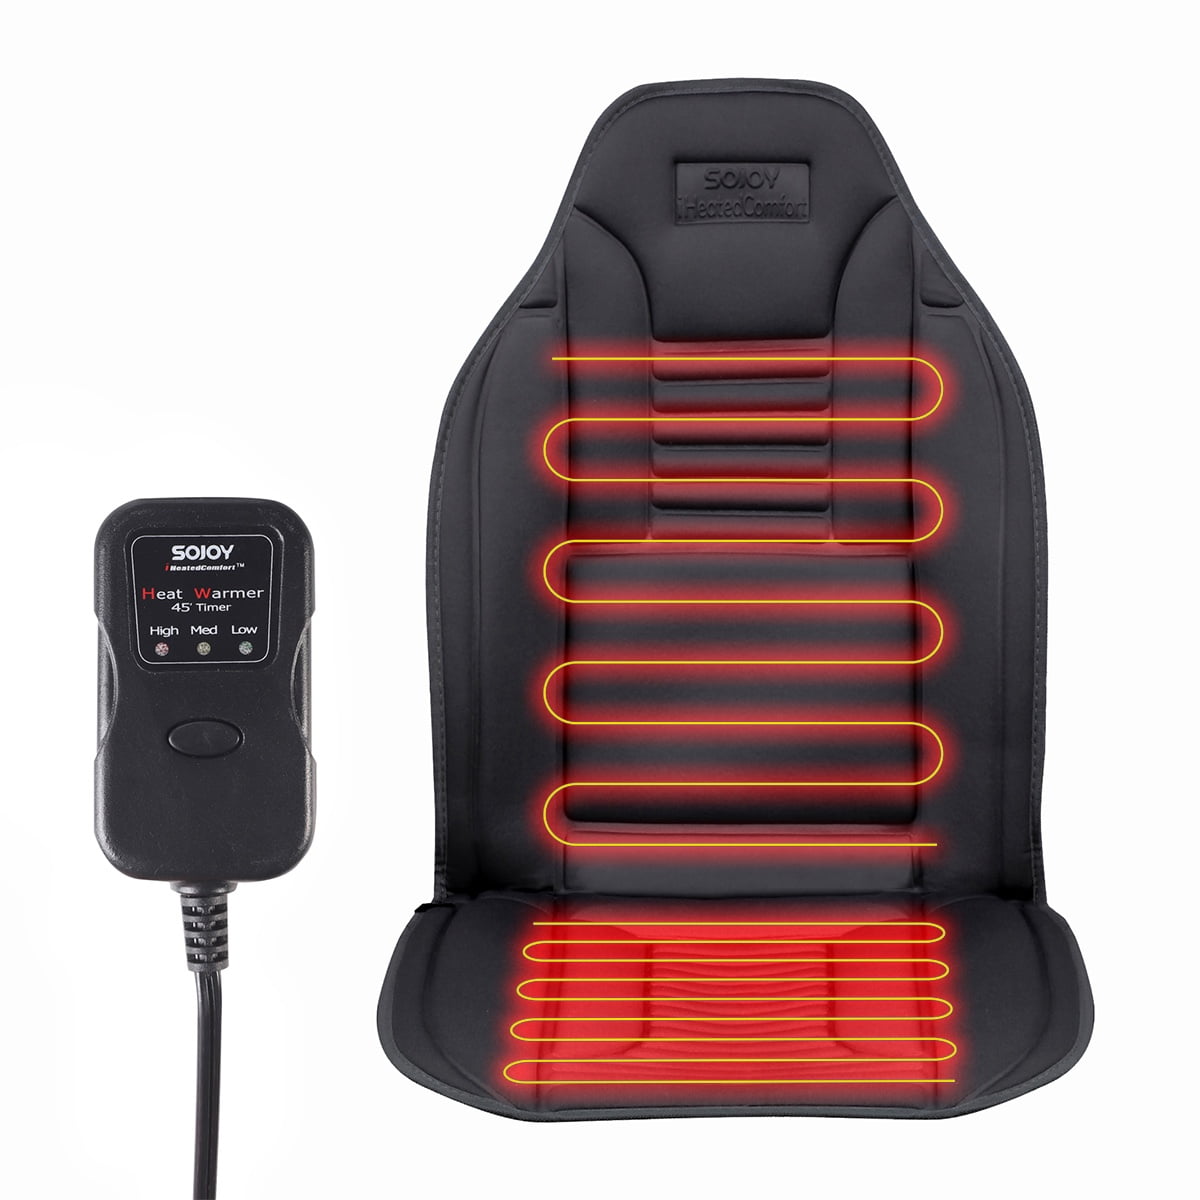 Sojoy Heated Seat Cushion Universal 12V Car Seat Heater Heated Cover Warmer  High/Medium/Low Temp Switch, 45 Minute Timer (Black)